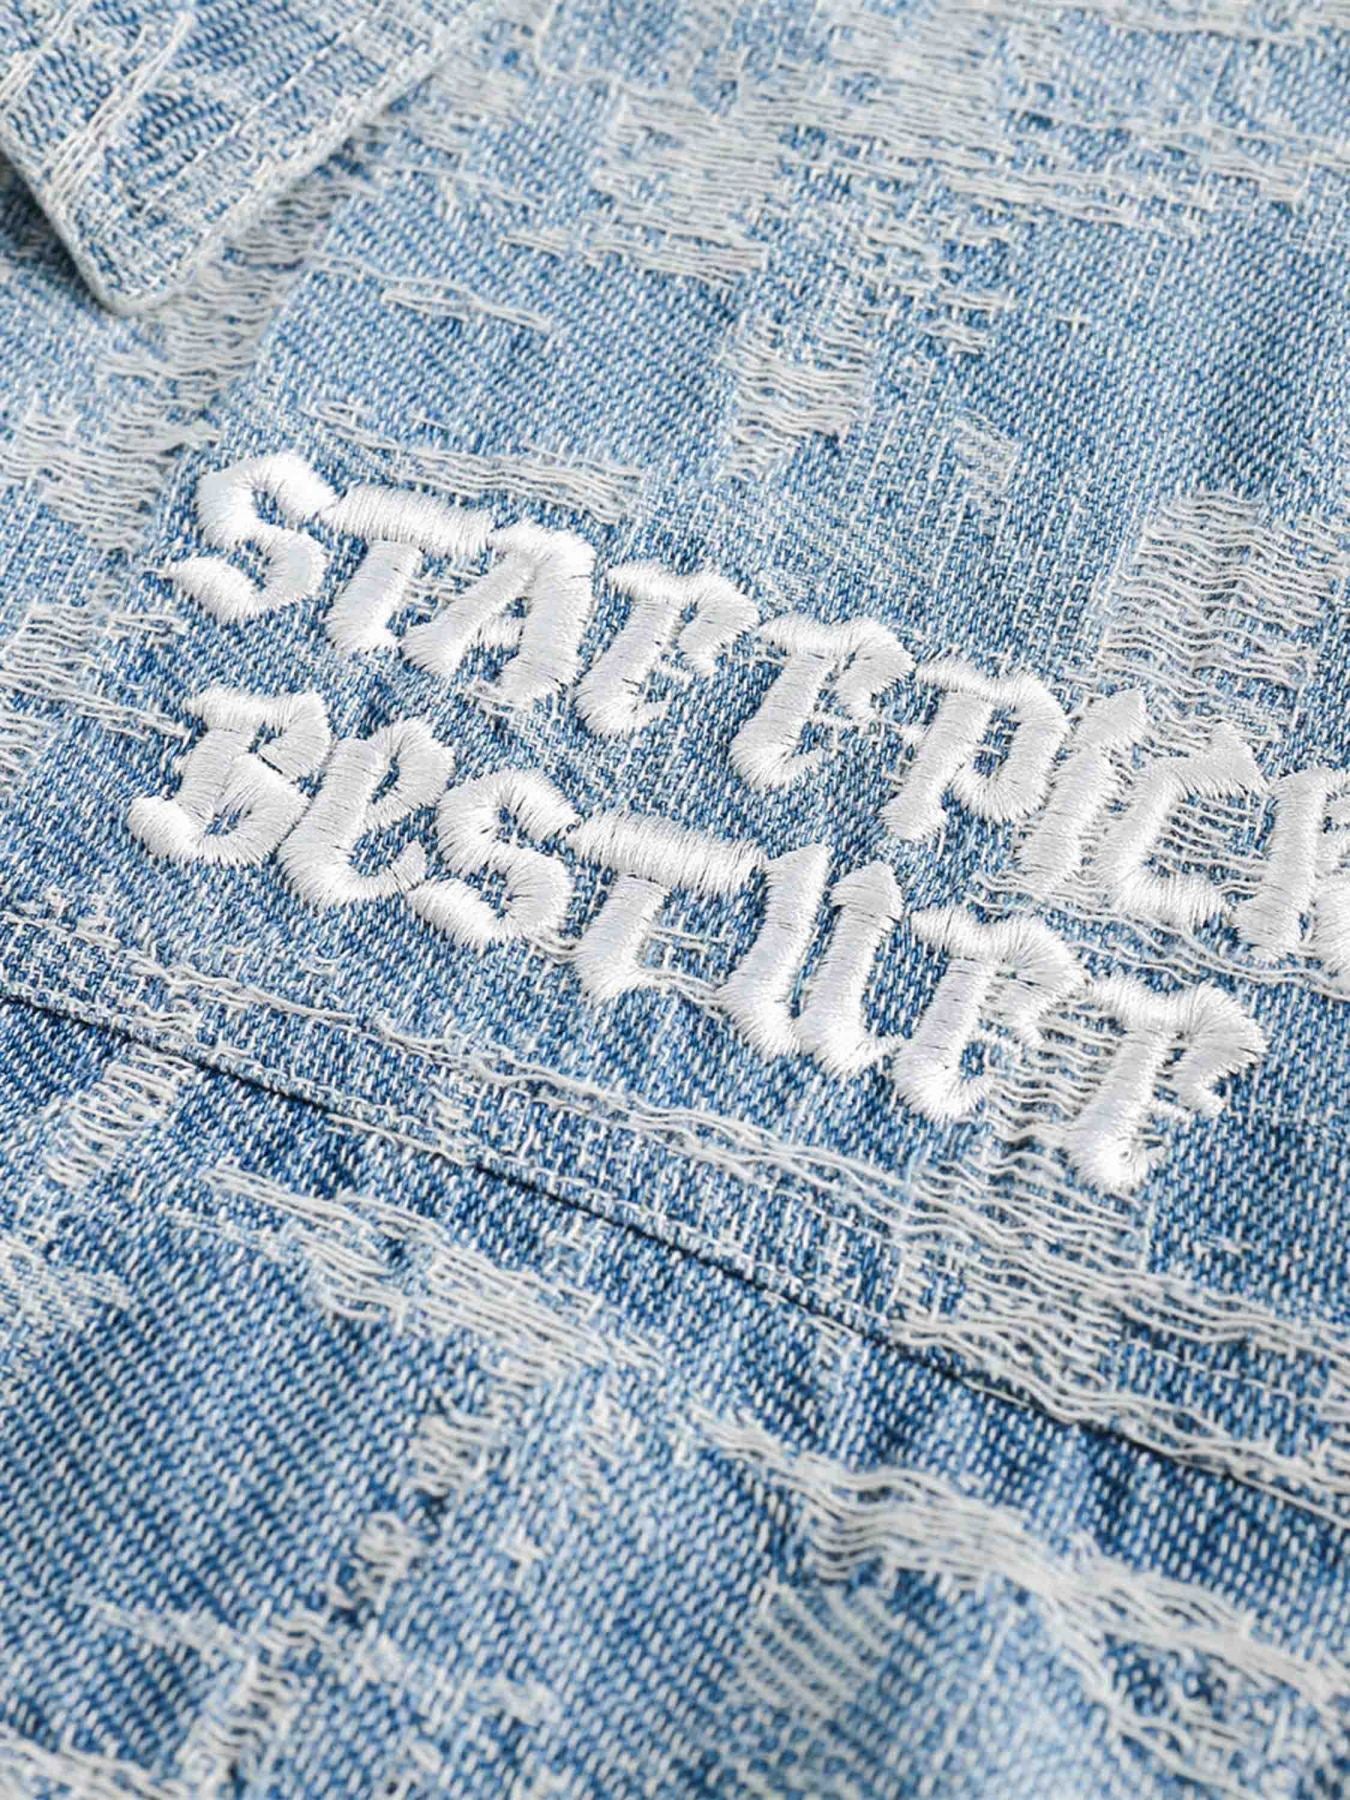 The Supermade Hip Hop Wears Out A Baggy Denim Jacket